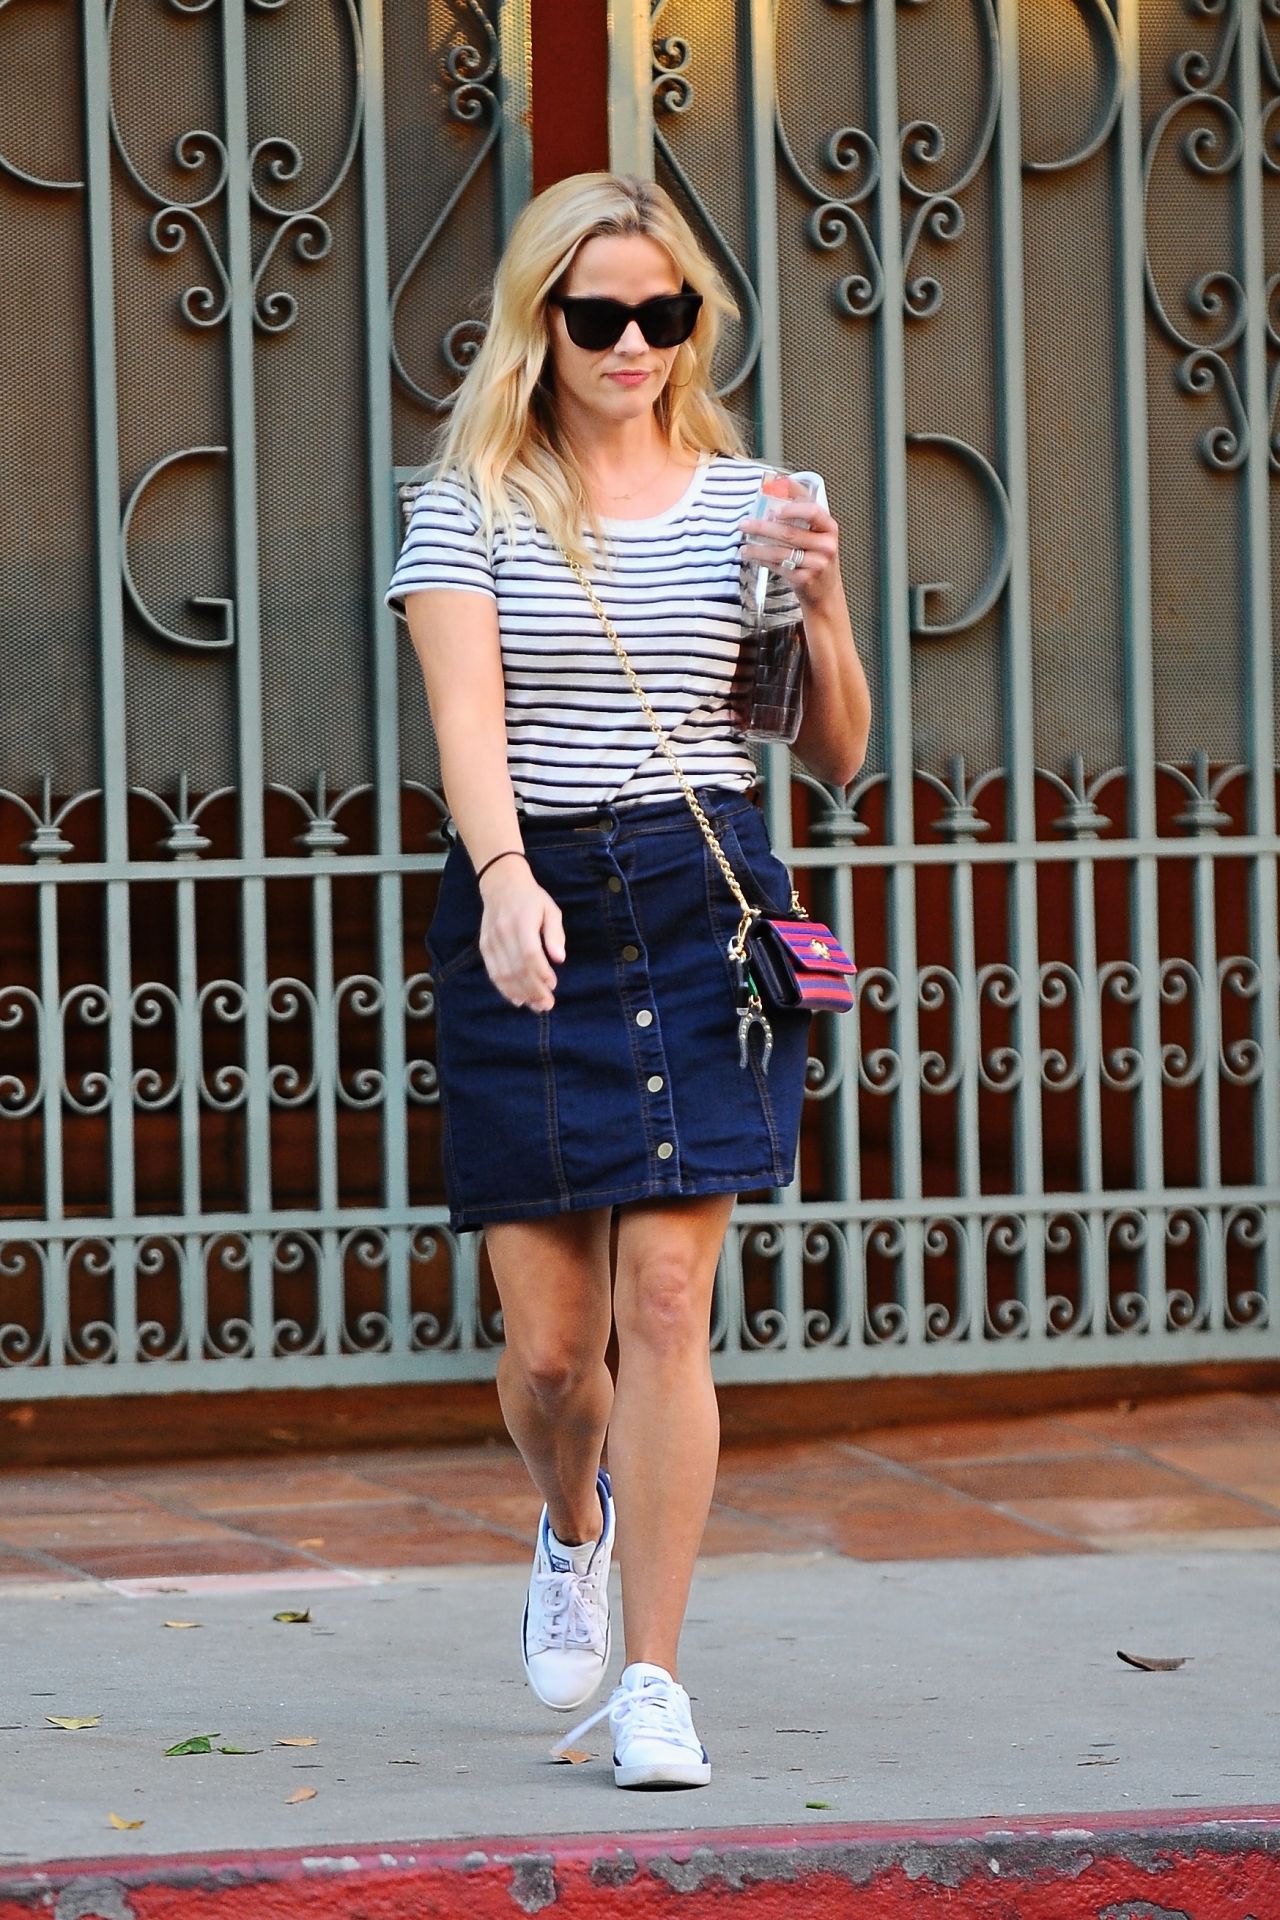 Reese Witherspoon Santa Monica July 26, 2018 – Star Style